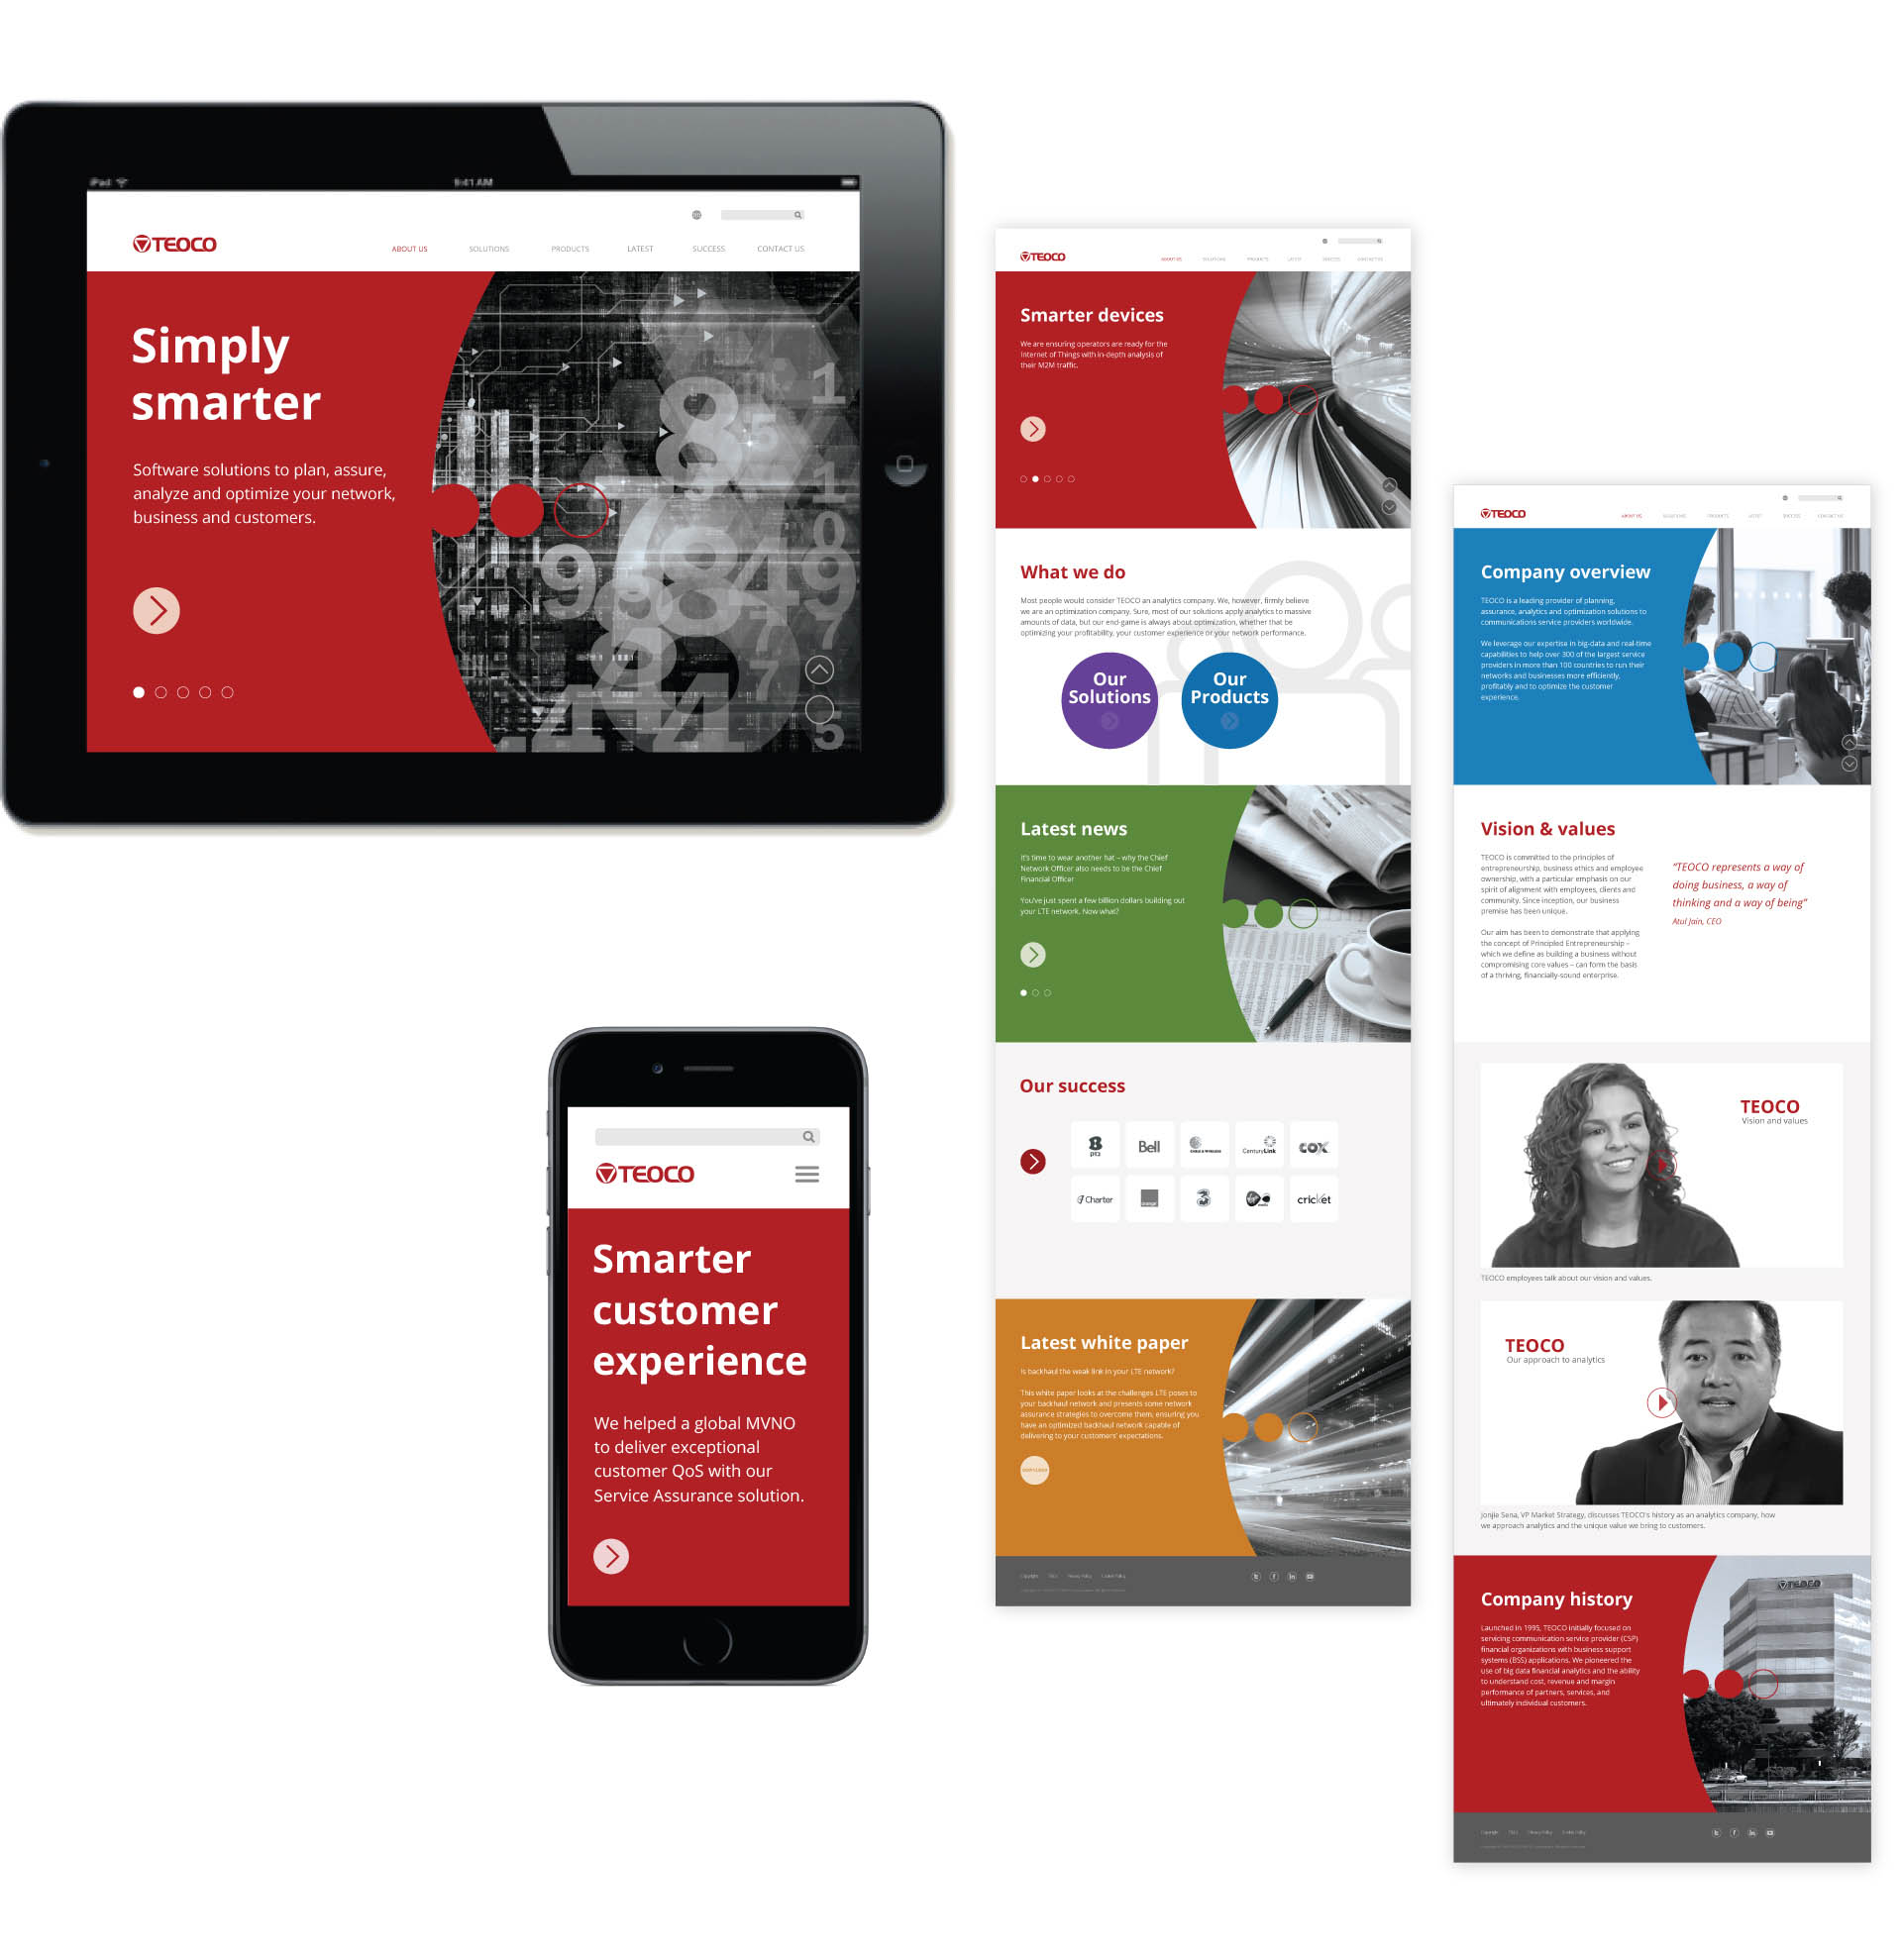 Visual language and web design for TEOCO – a leading provider of planning, assurance, analytics and optimization solutions to communications service providers worldwide